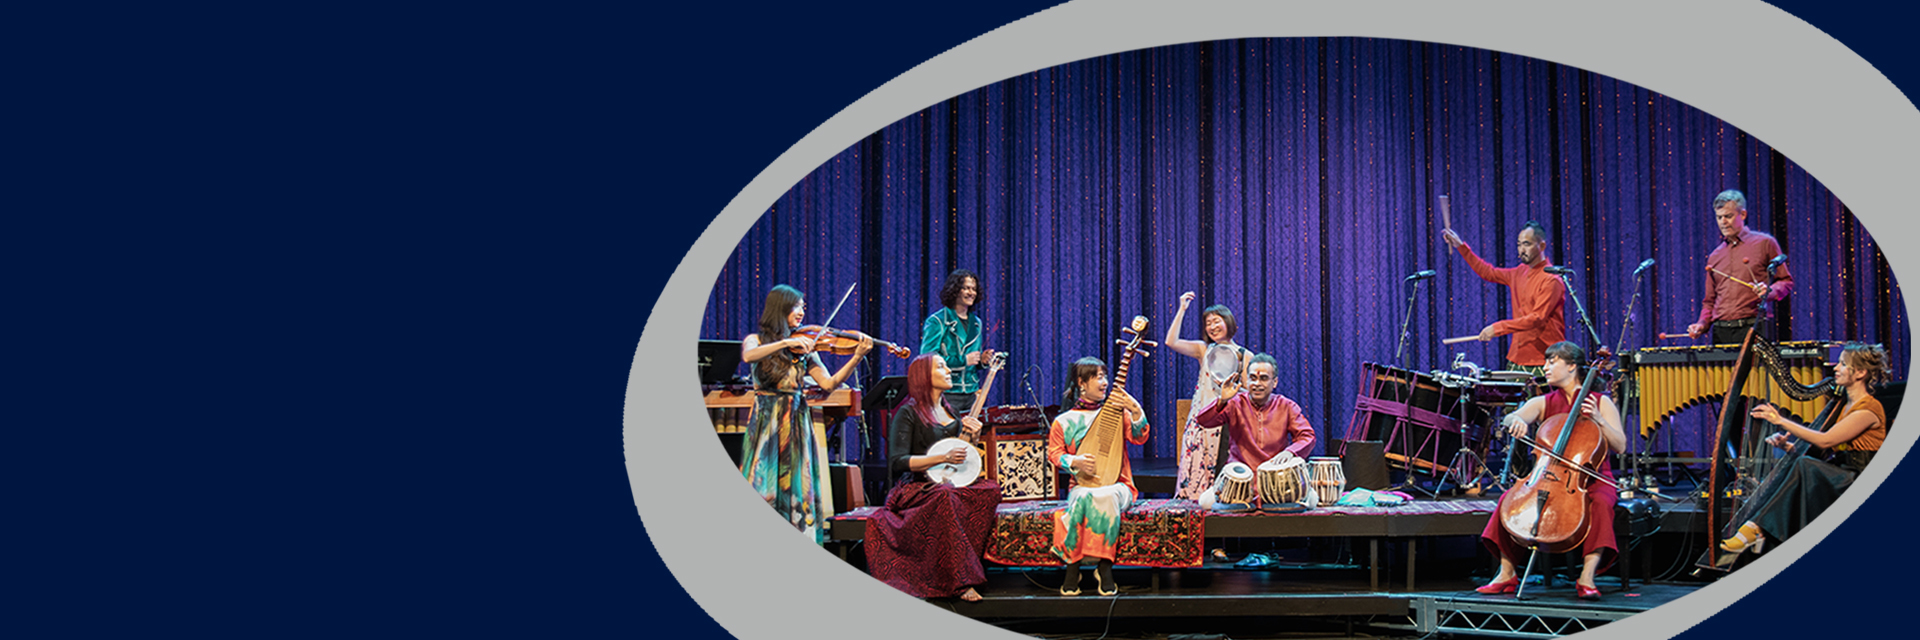 colorful picture featuring the musical artists of Silkroad Ensemble